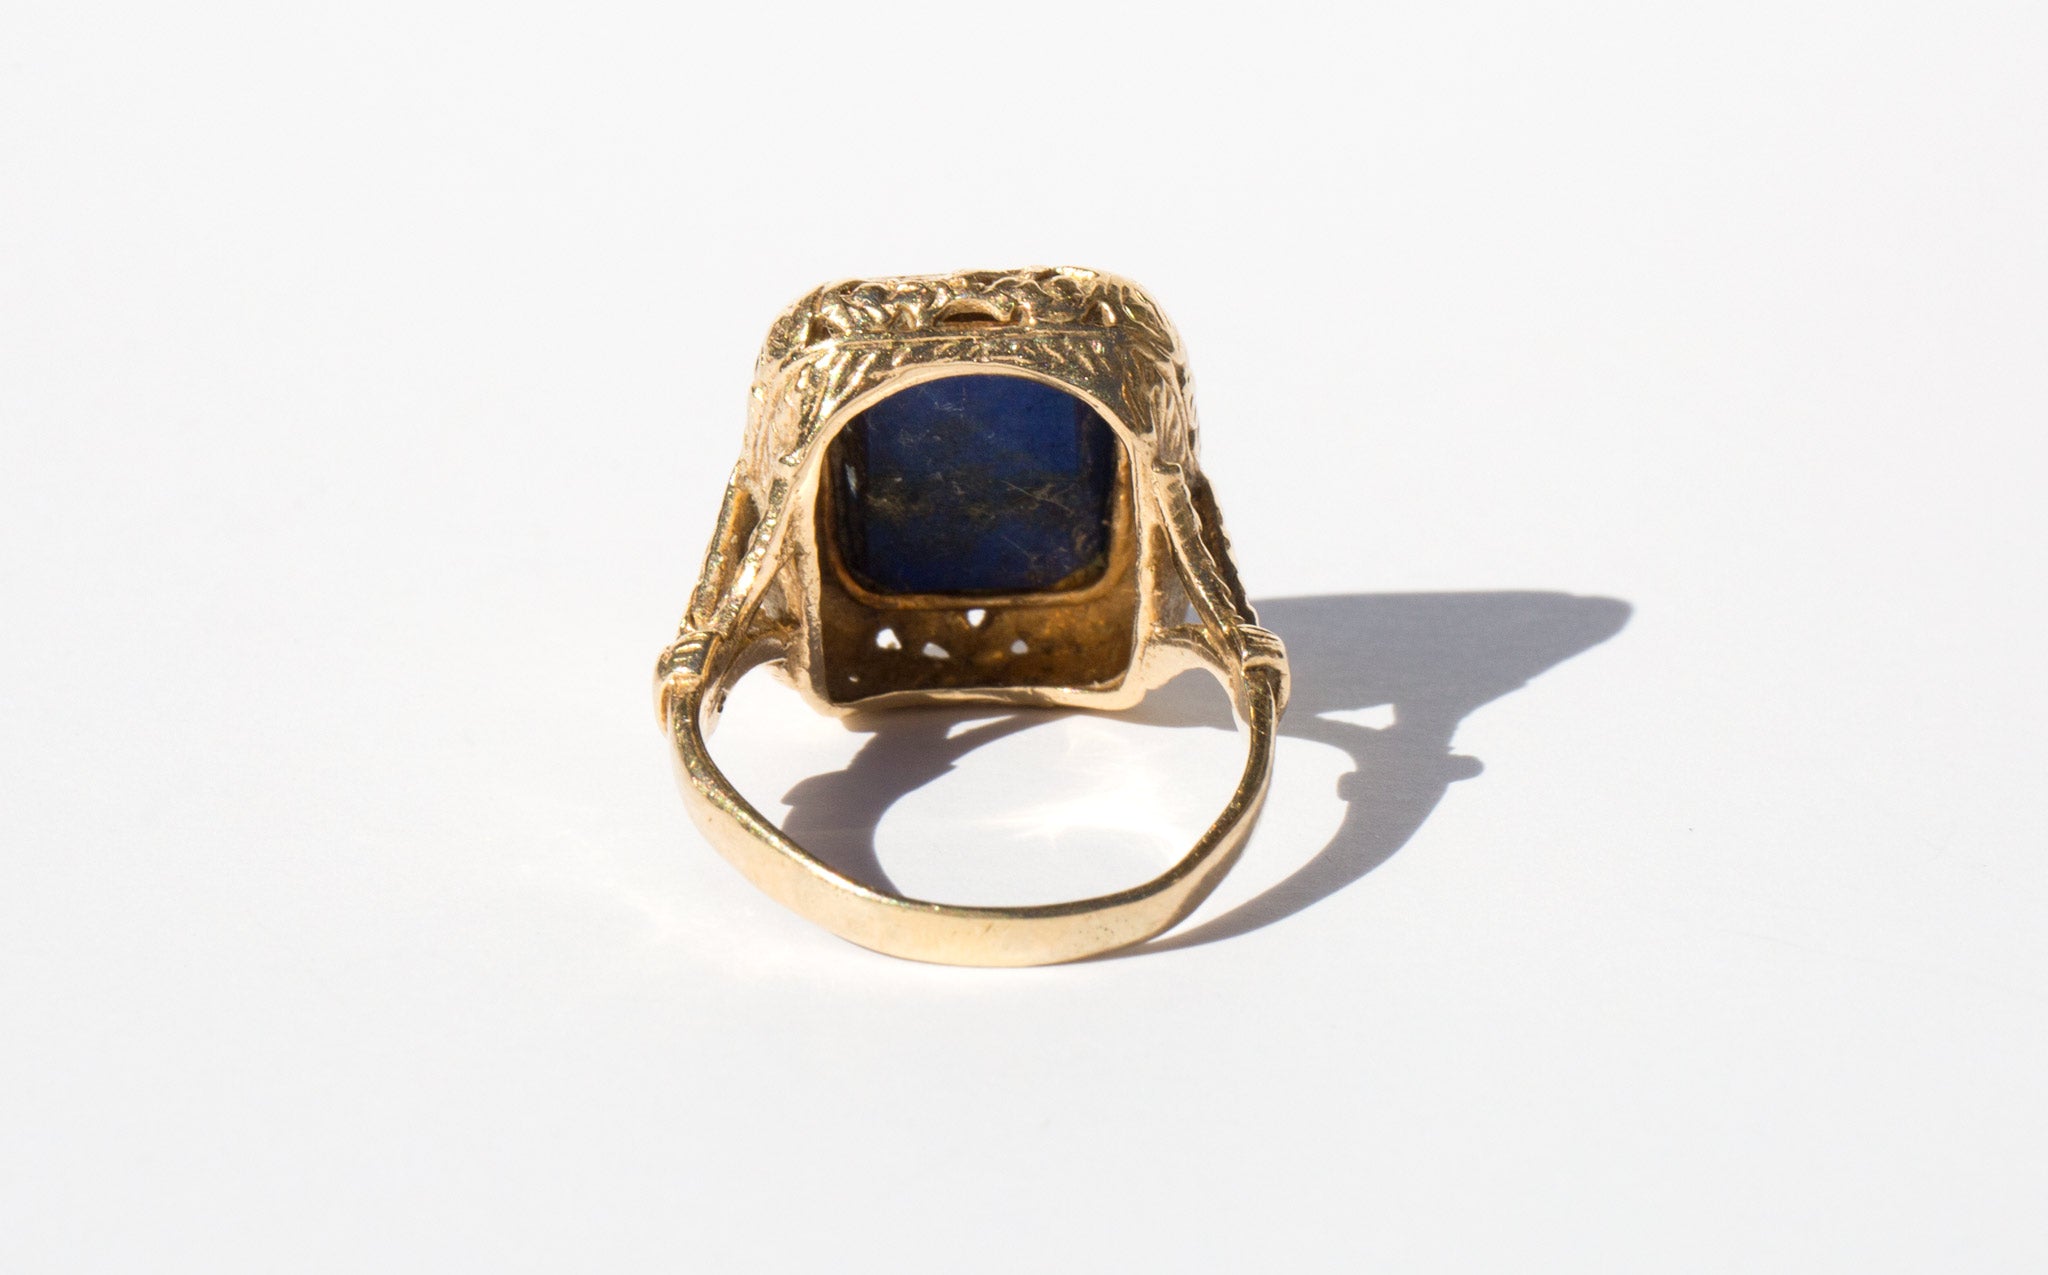 Bysshe Ring